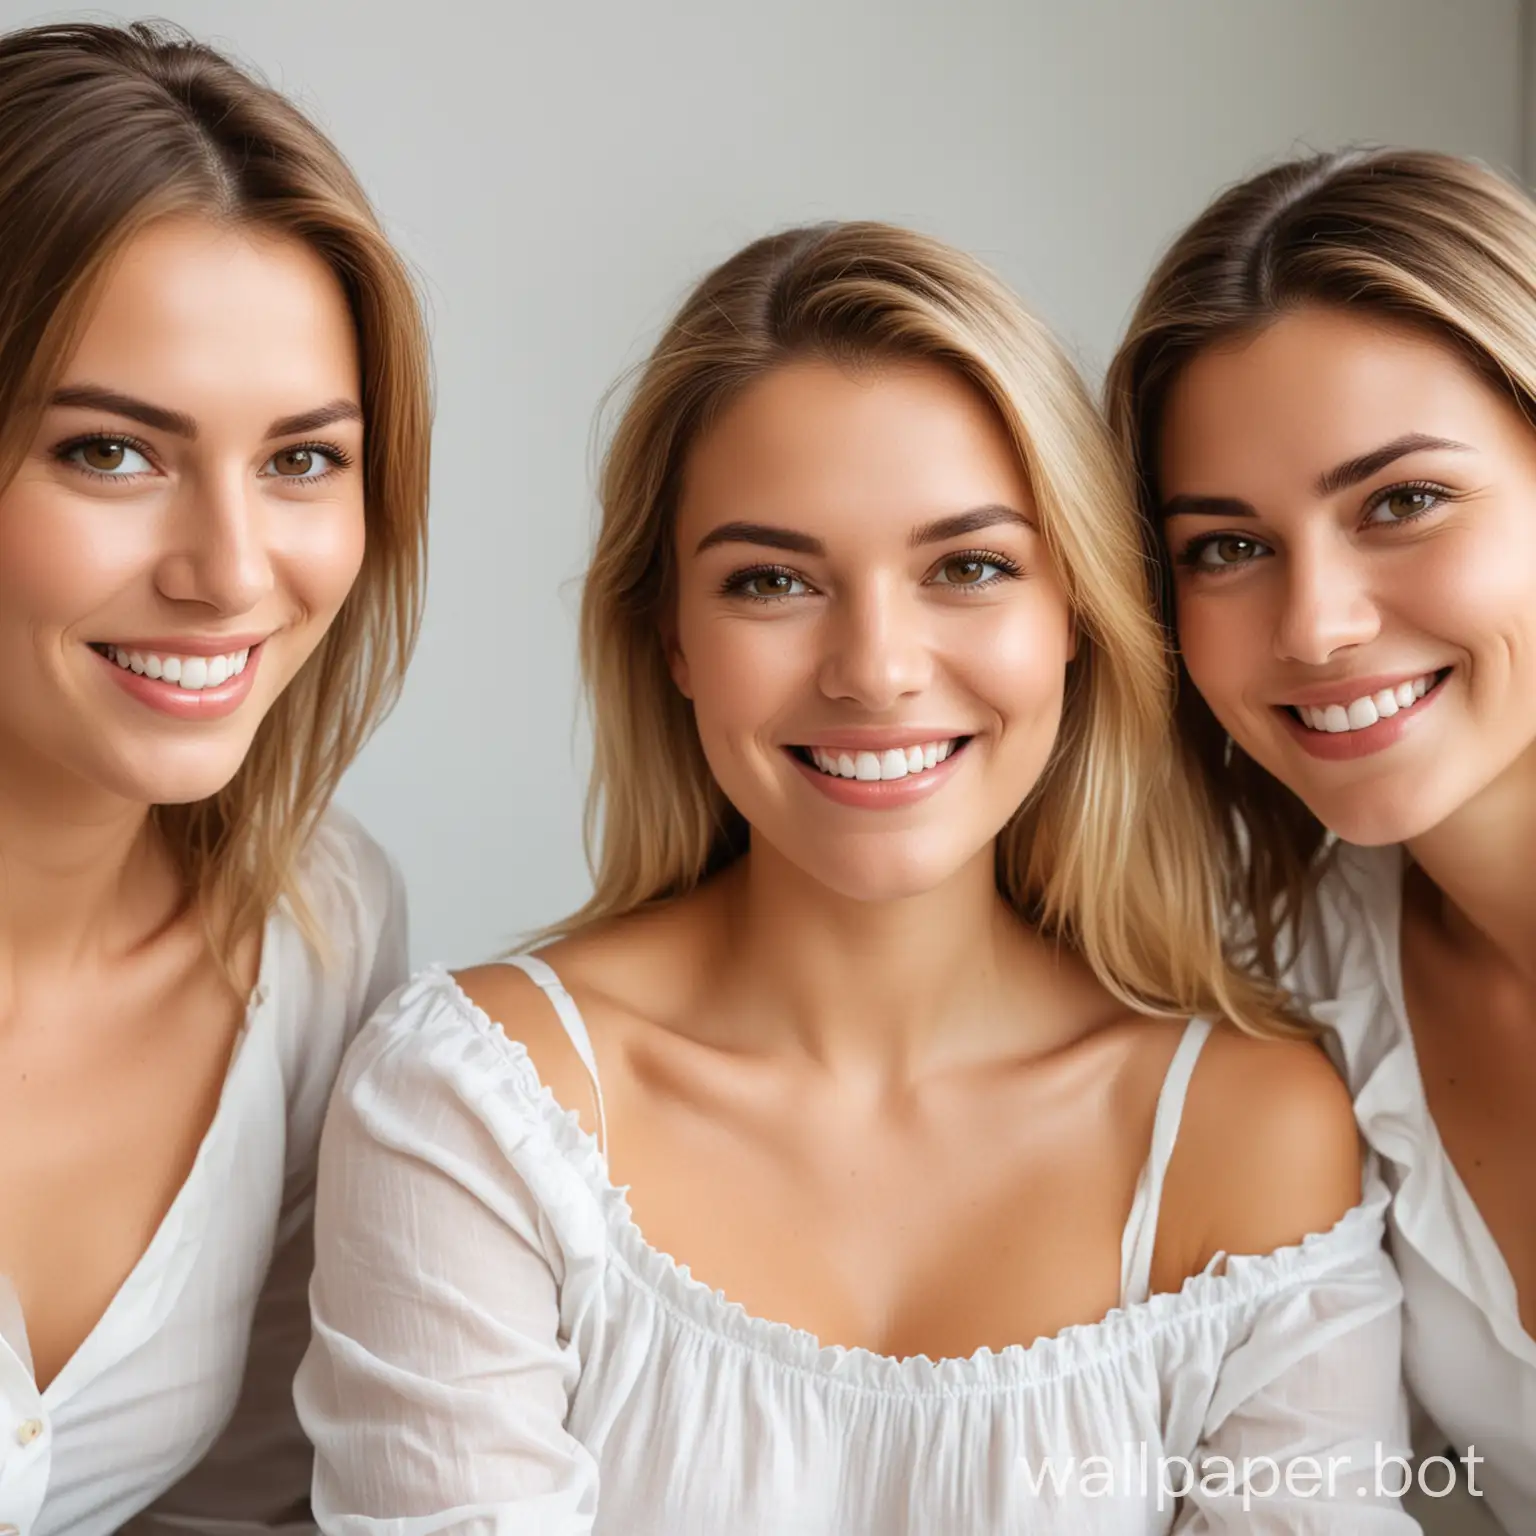 Three-Smiling-Women-in-White-Blouses-Joyful-Trio-with-Diverse-Features